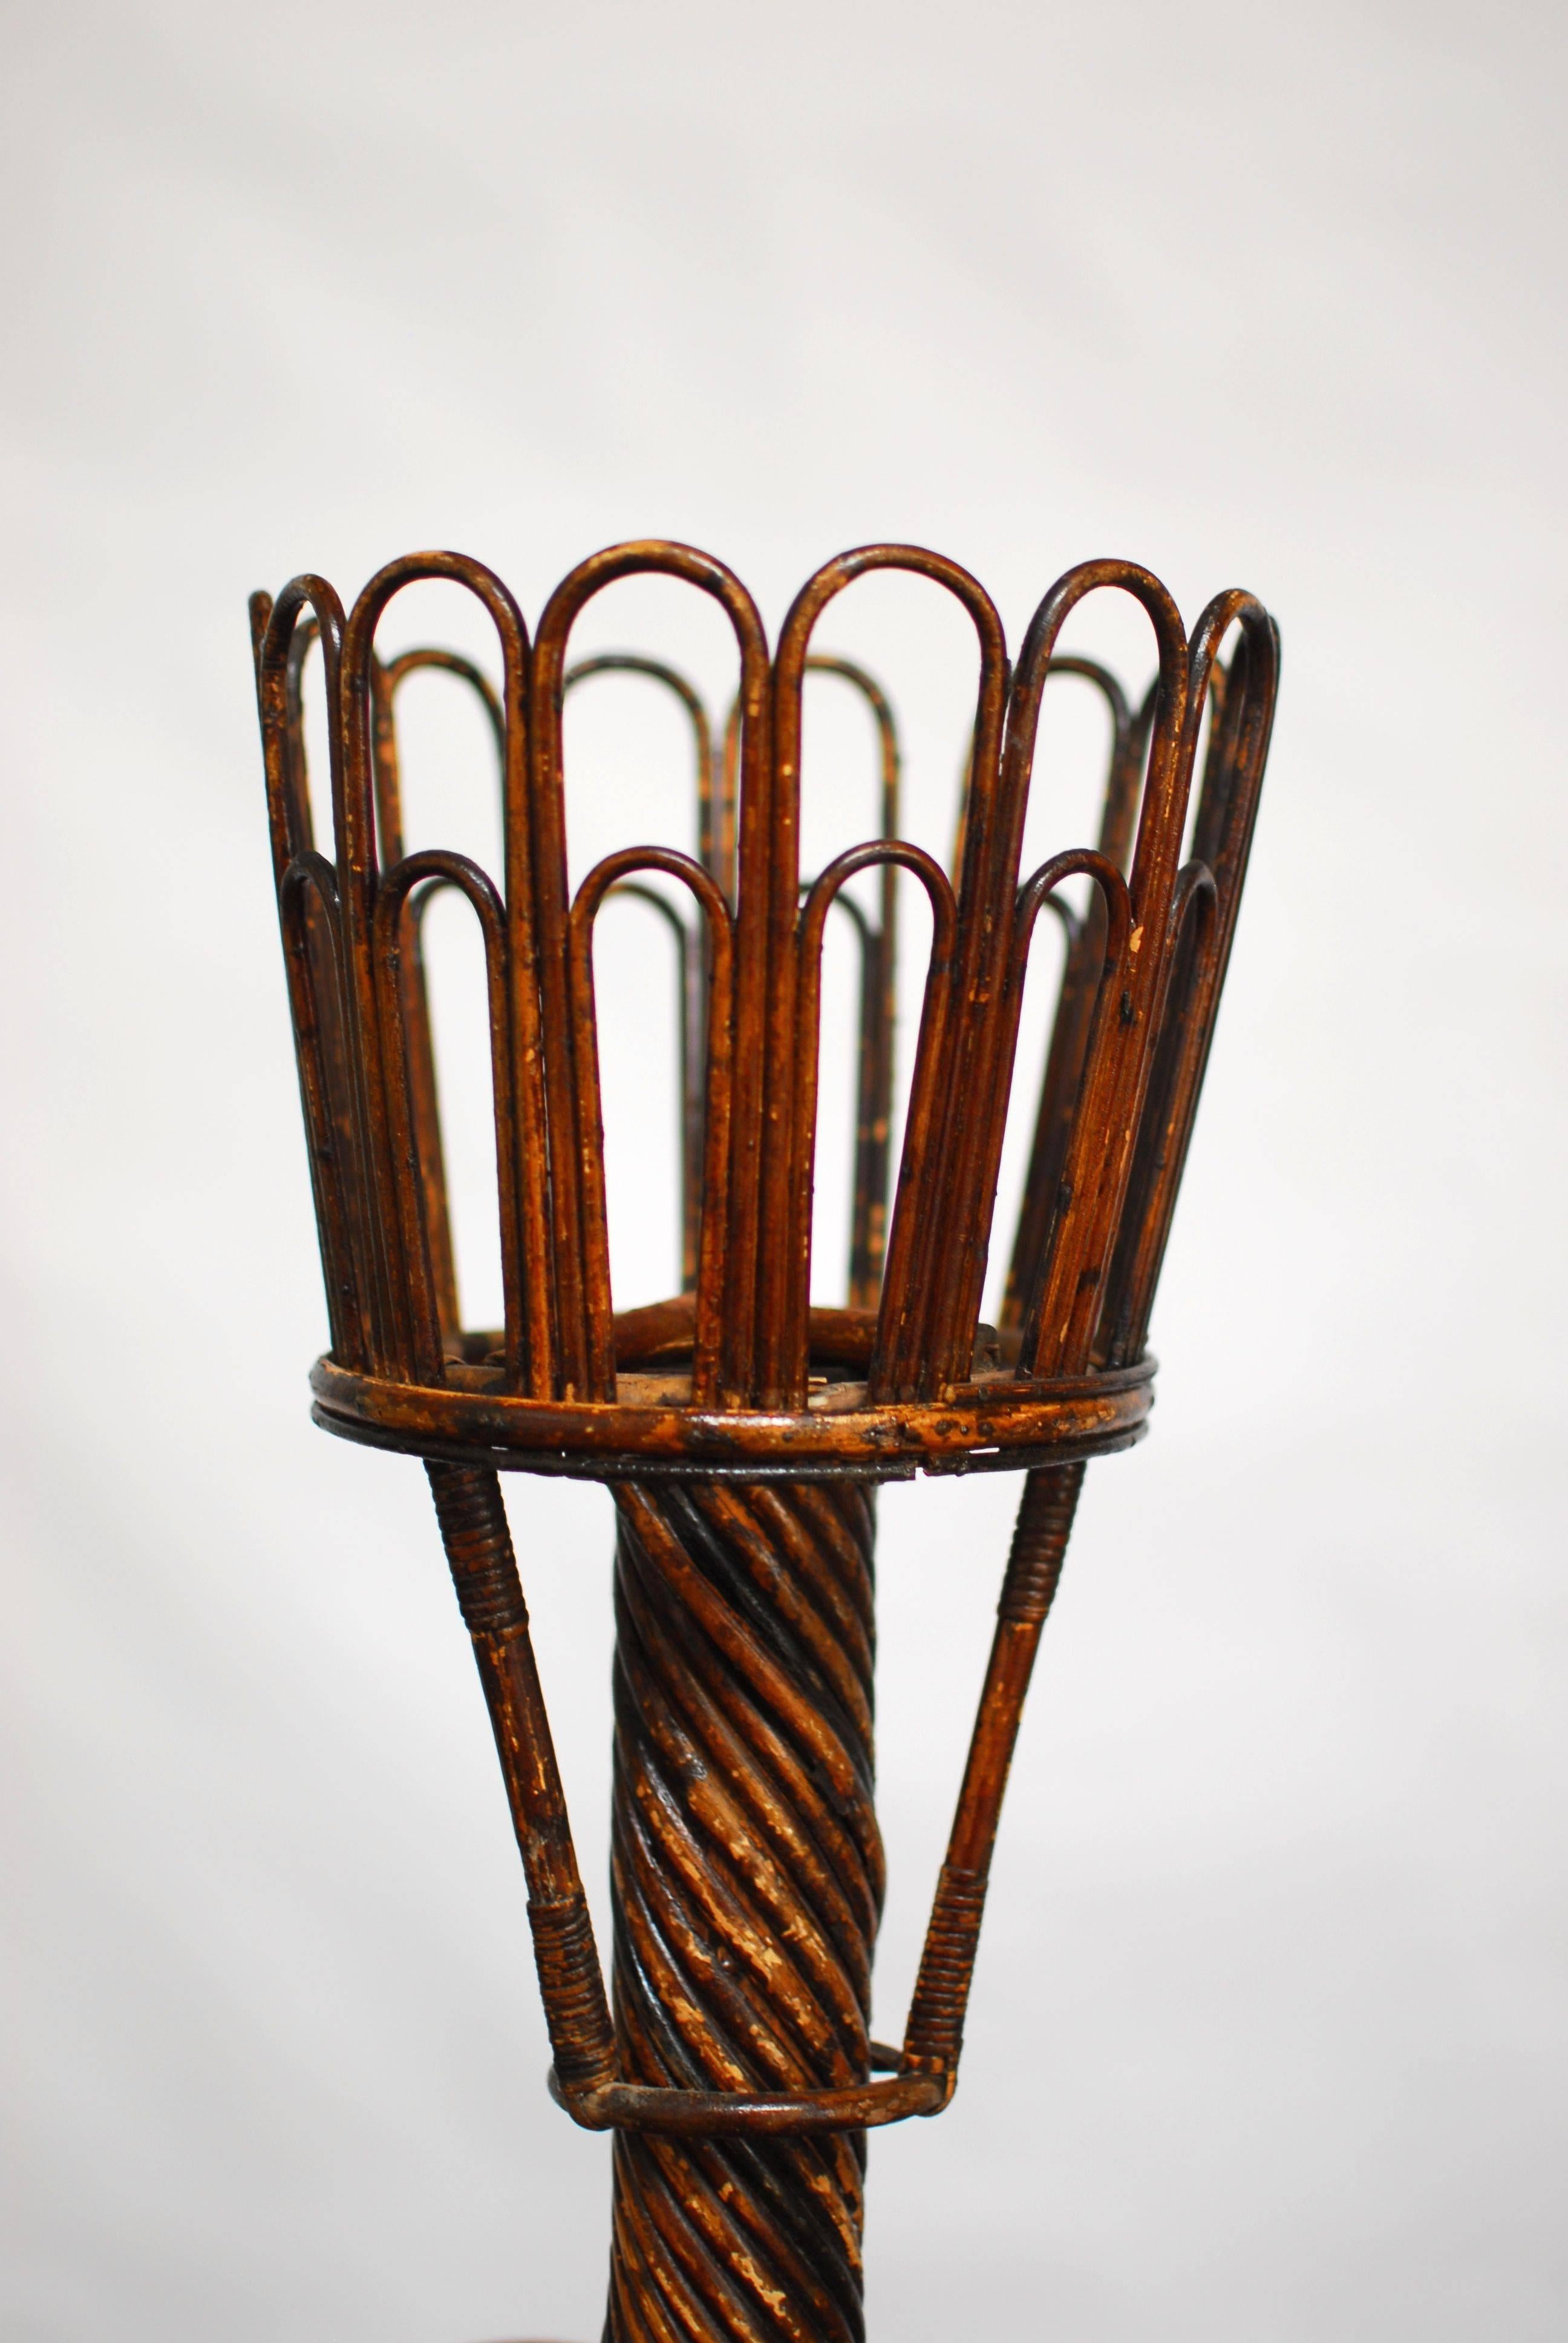 Bamboo rattan two tier plant stand made in the Art Nouveau style. Constructed with a tripod base and decorated with whimsical round rings on the base and shelf. From the Pennsylvania Estate of billionaire banking heir Richard Mellon. Bottom tier 